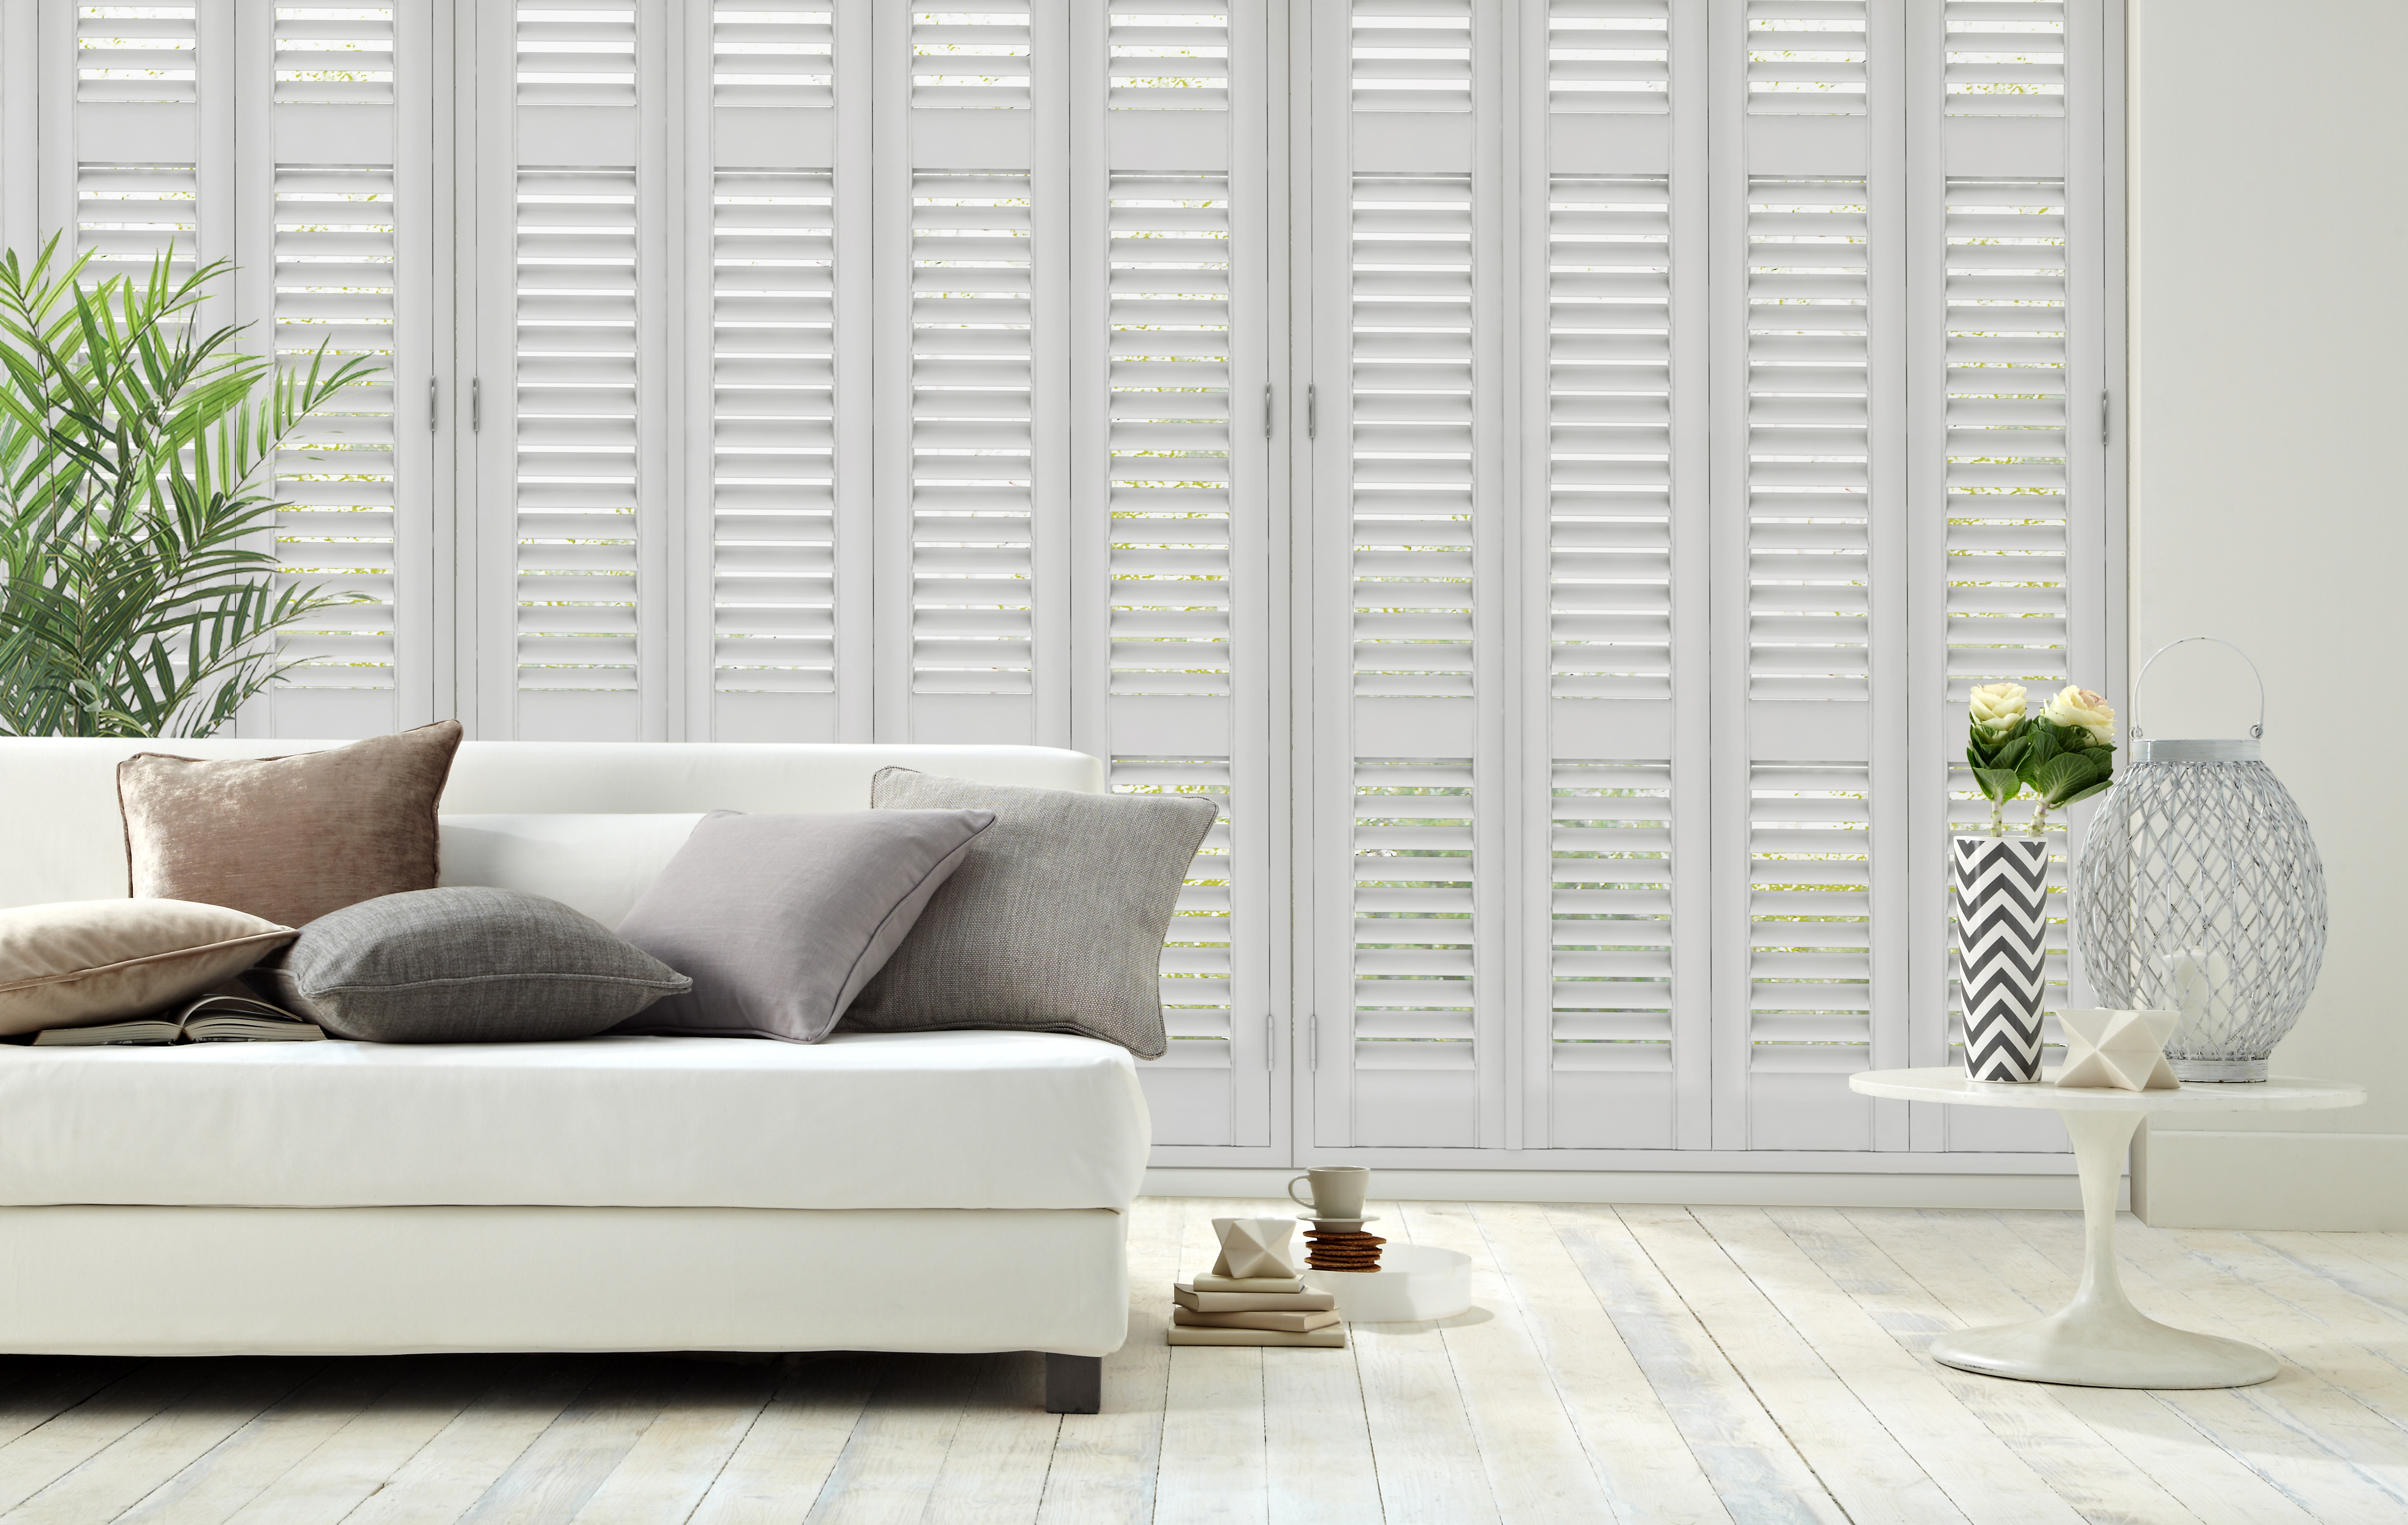 White room with shutters